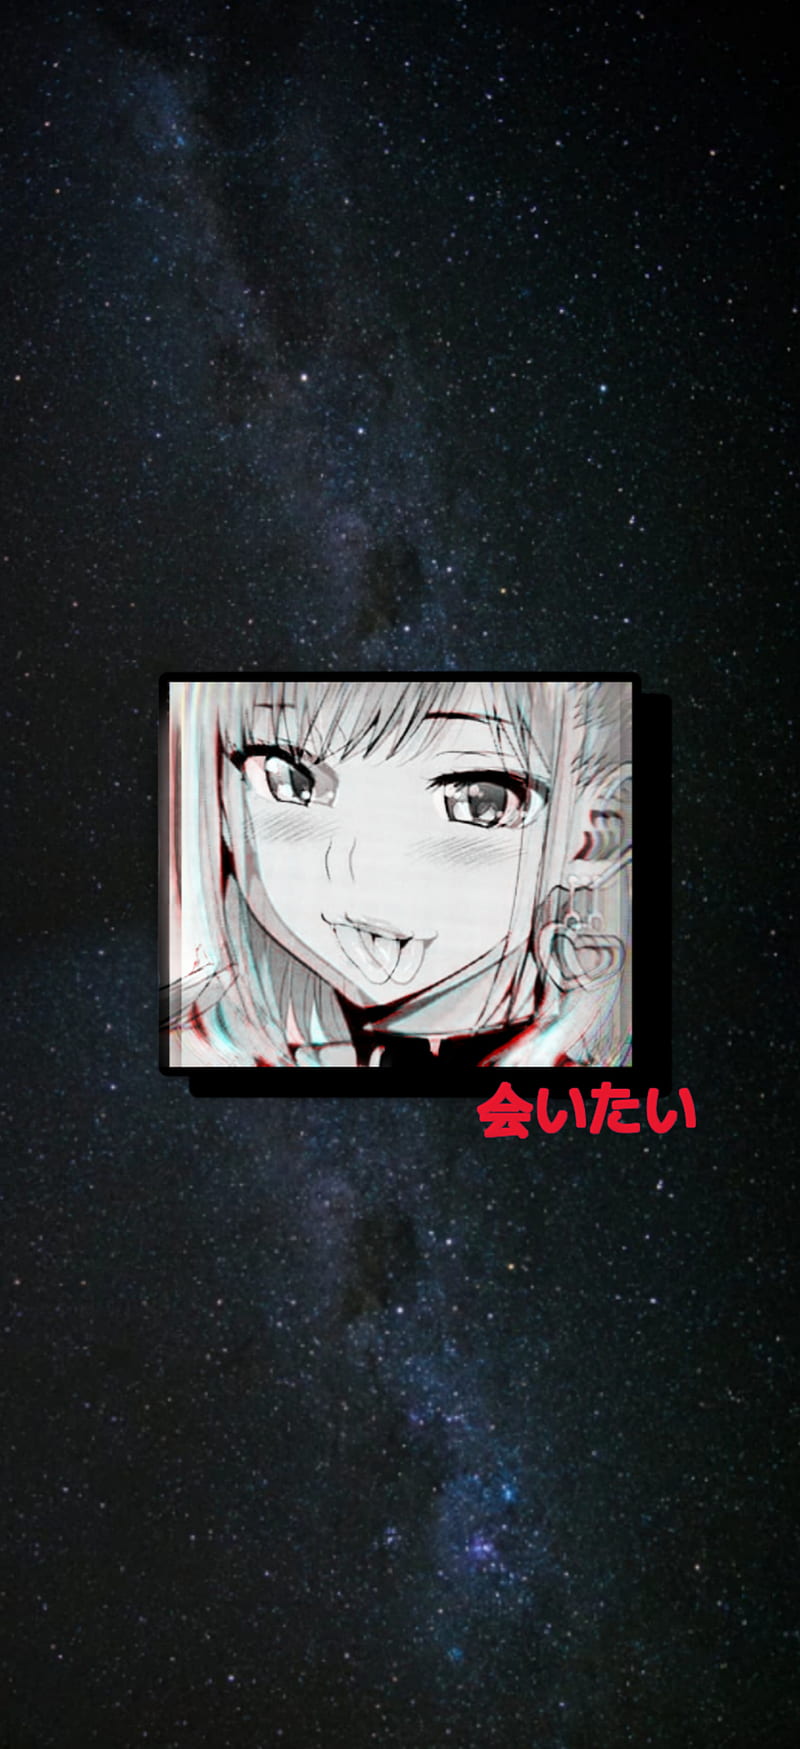 4 Anime Glitch Wallpapers for iPhone and Android by Jordan Chan